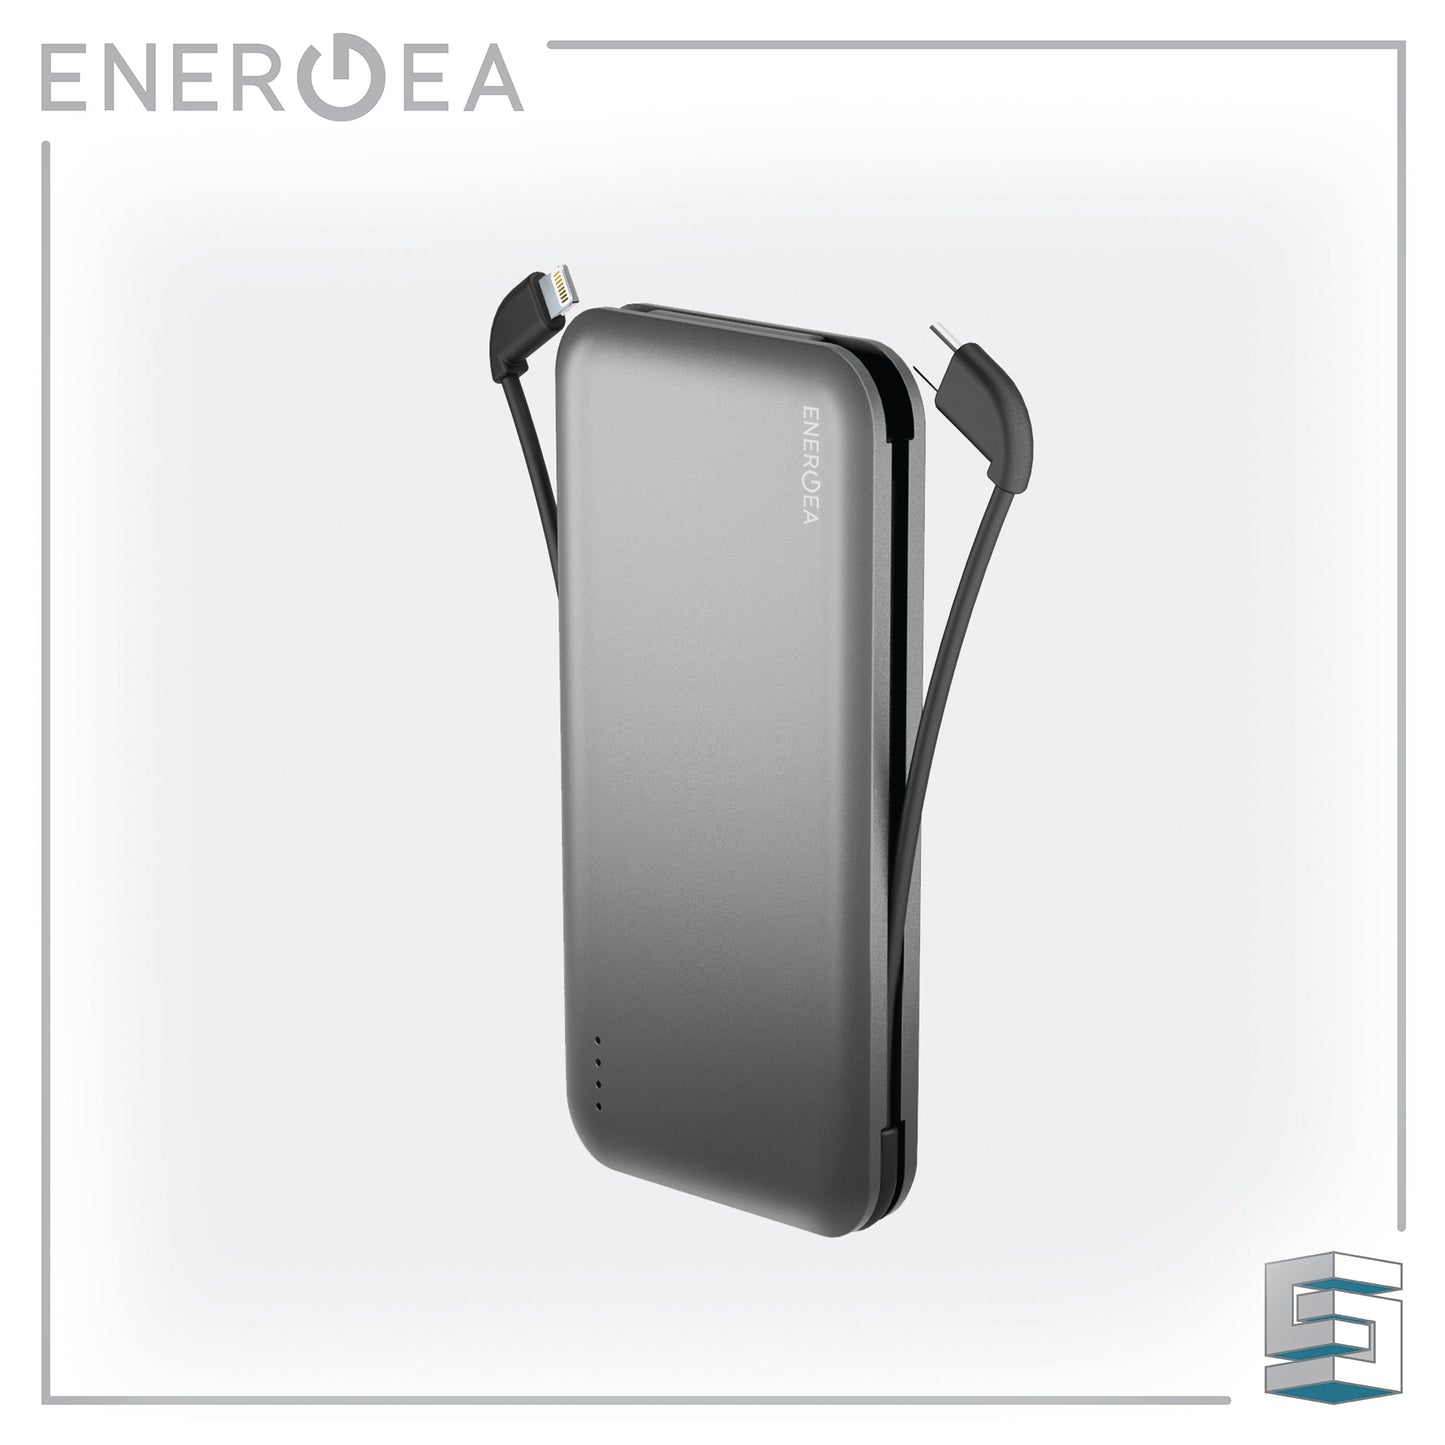 Power Bank 10000mAh - ENERGEA IntraLite Trio CL1201 Global Synergy Concepts